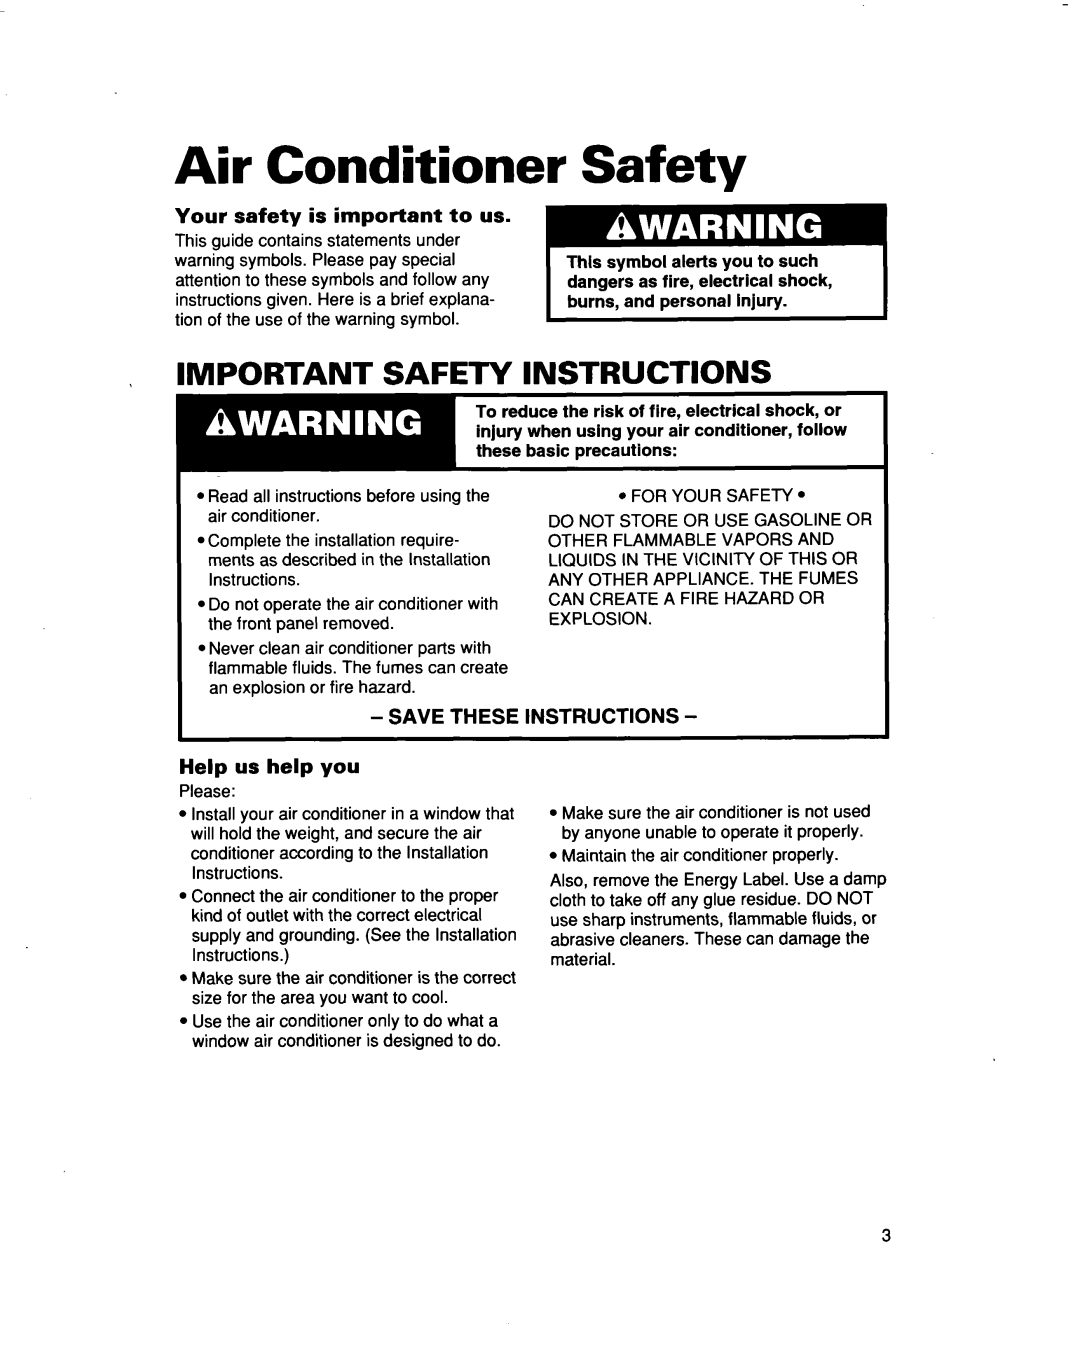 Whirlpool ACM492 Air Conditioner, Important Safety Instructions, Your safety is important to us, Help us help you 